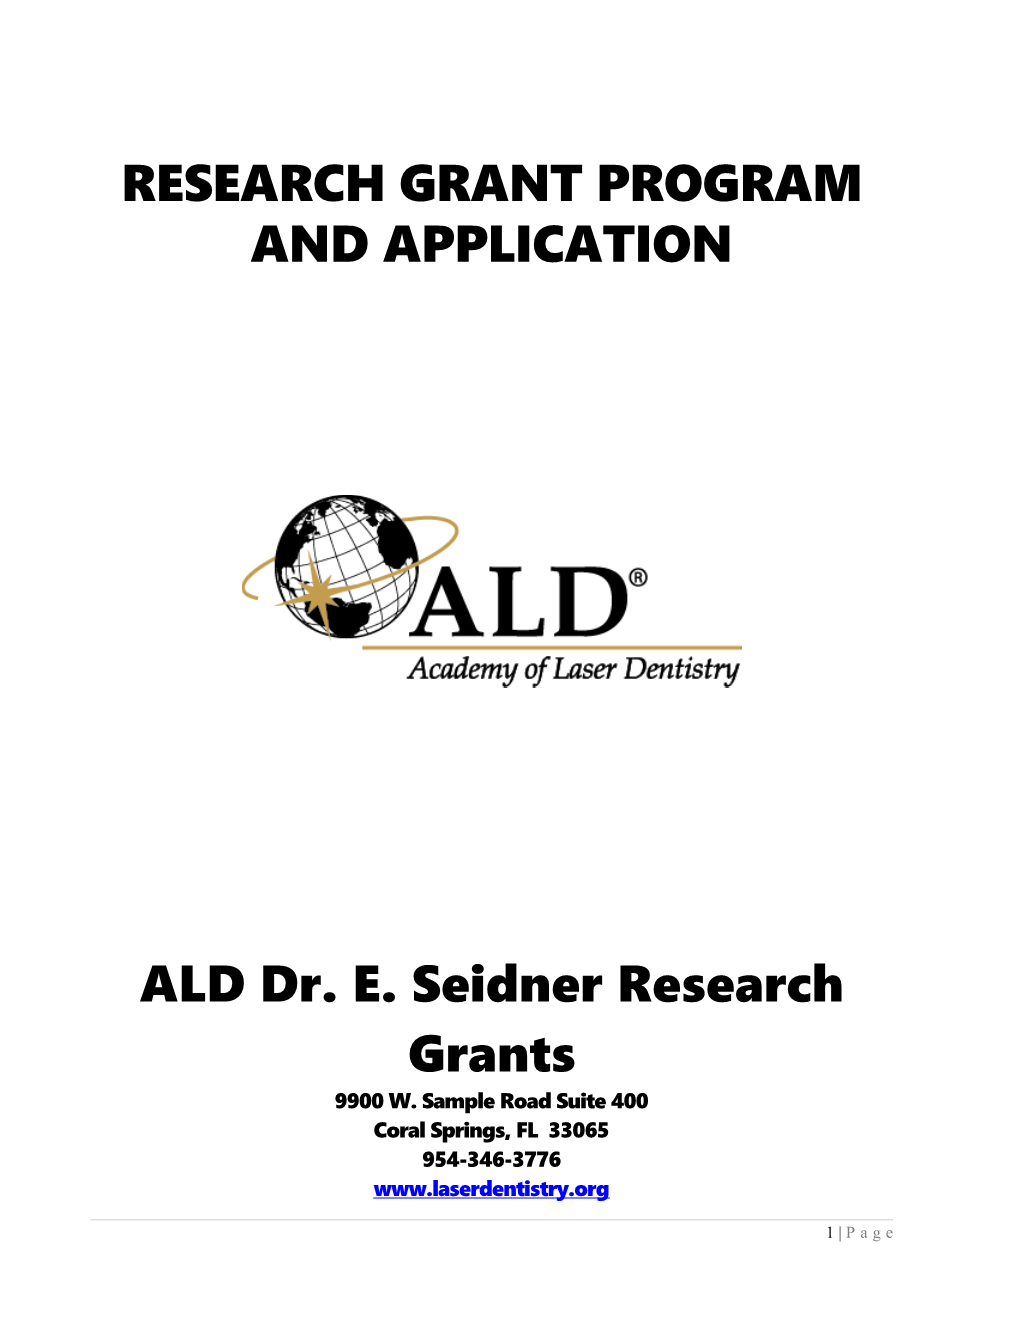 Research Grant Application